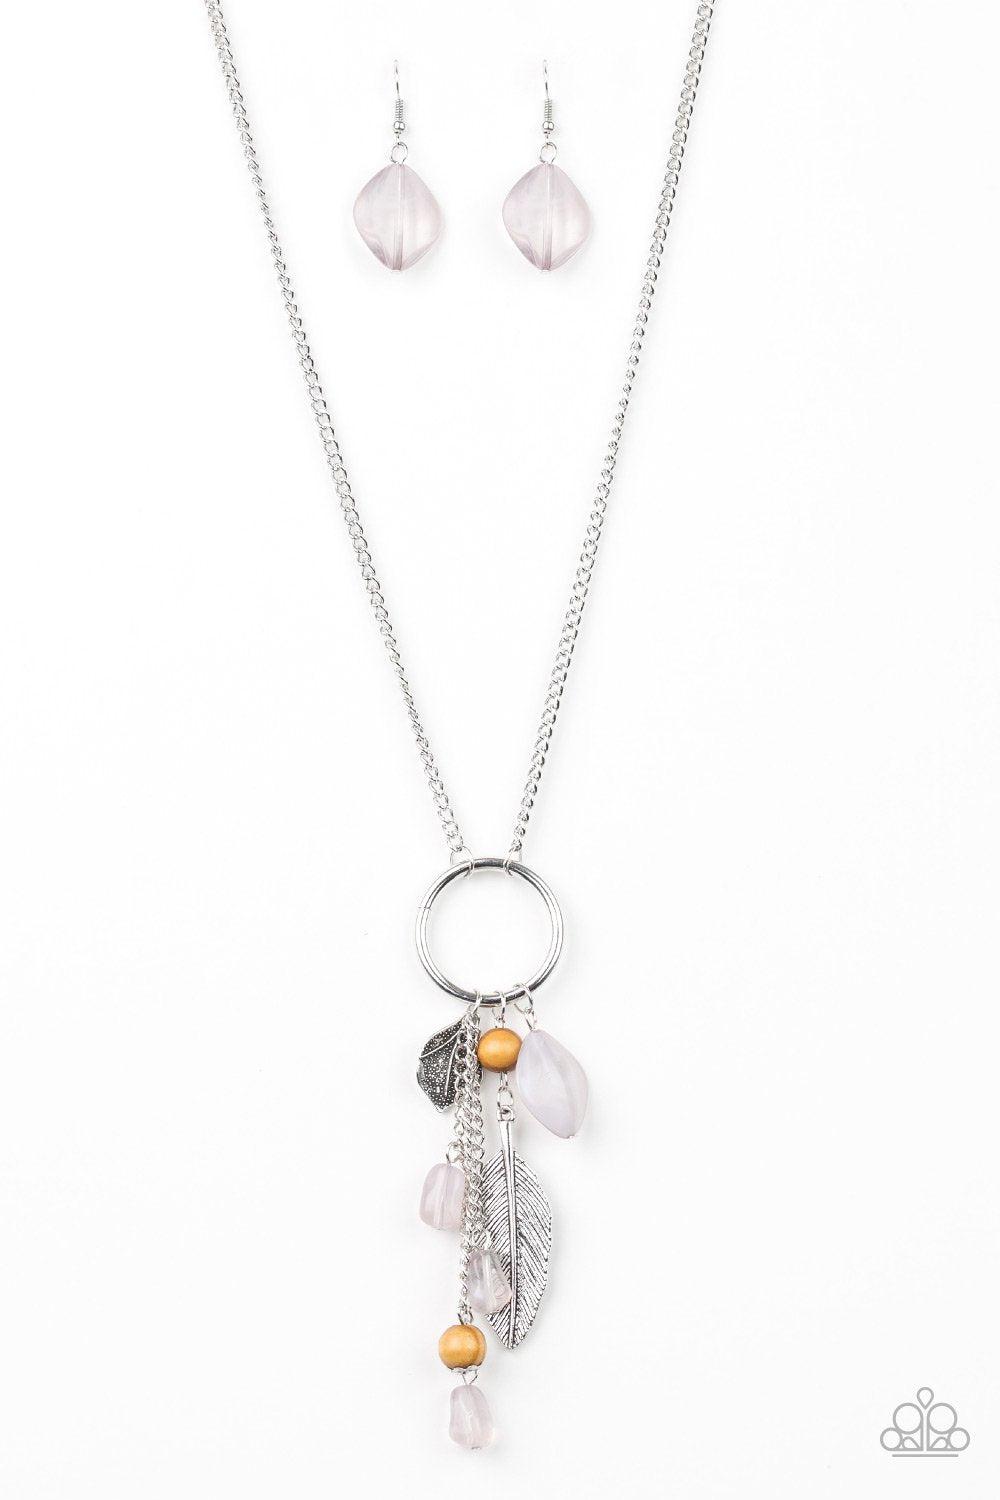 Sky High Style Silver Feather Charm Necklace - Paparazzi Accessories-CarasShop.com - $5 Jewelry by Cara Jewels